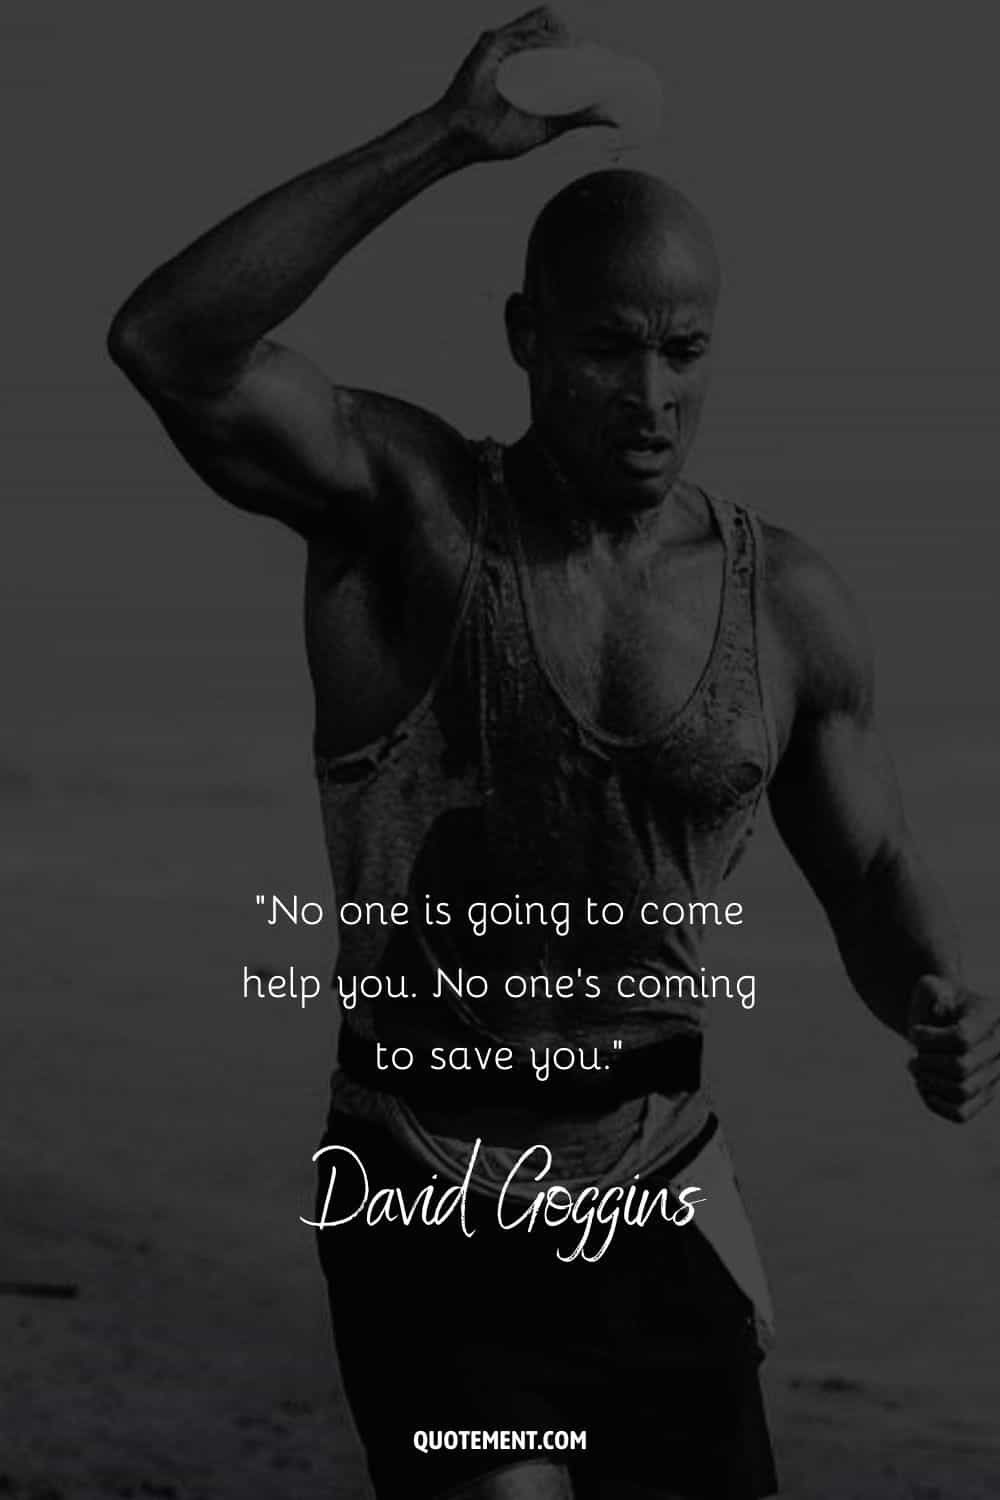 Photo of David Goggins representing a deep quote by him